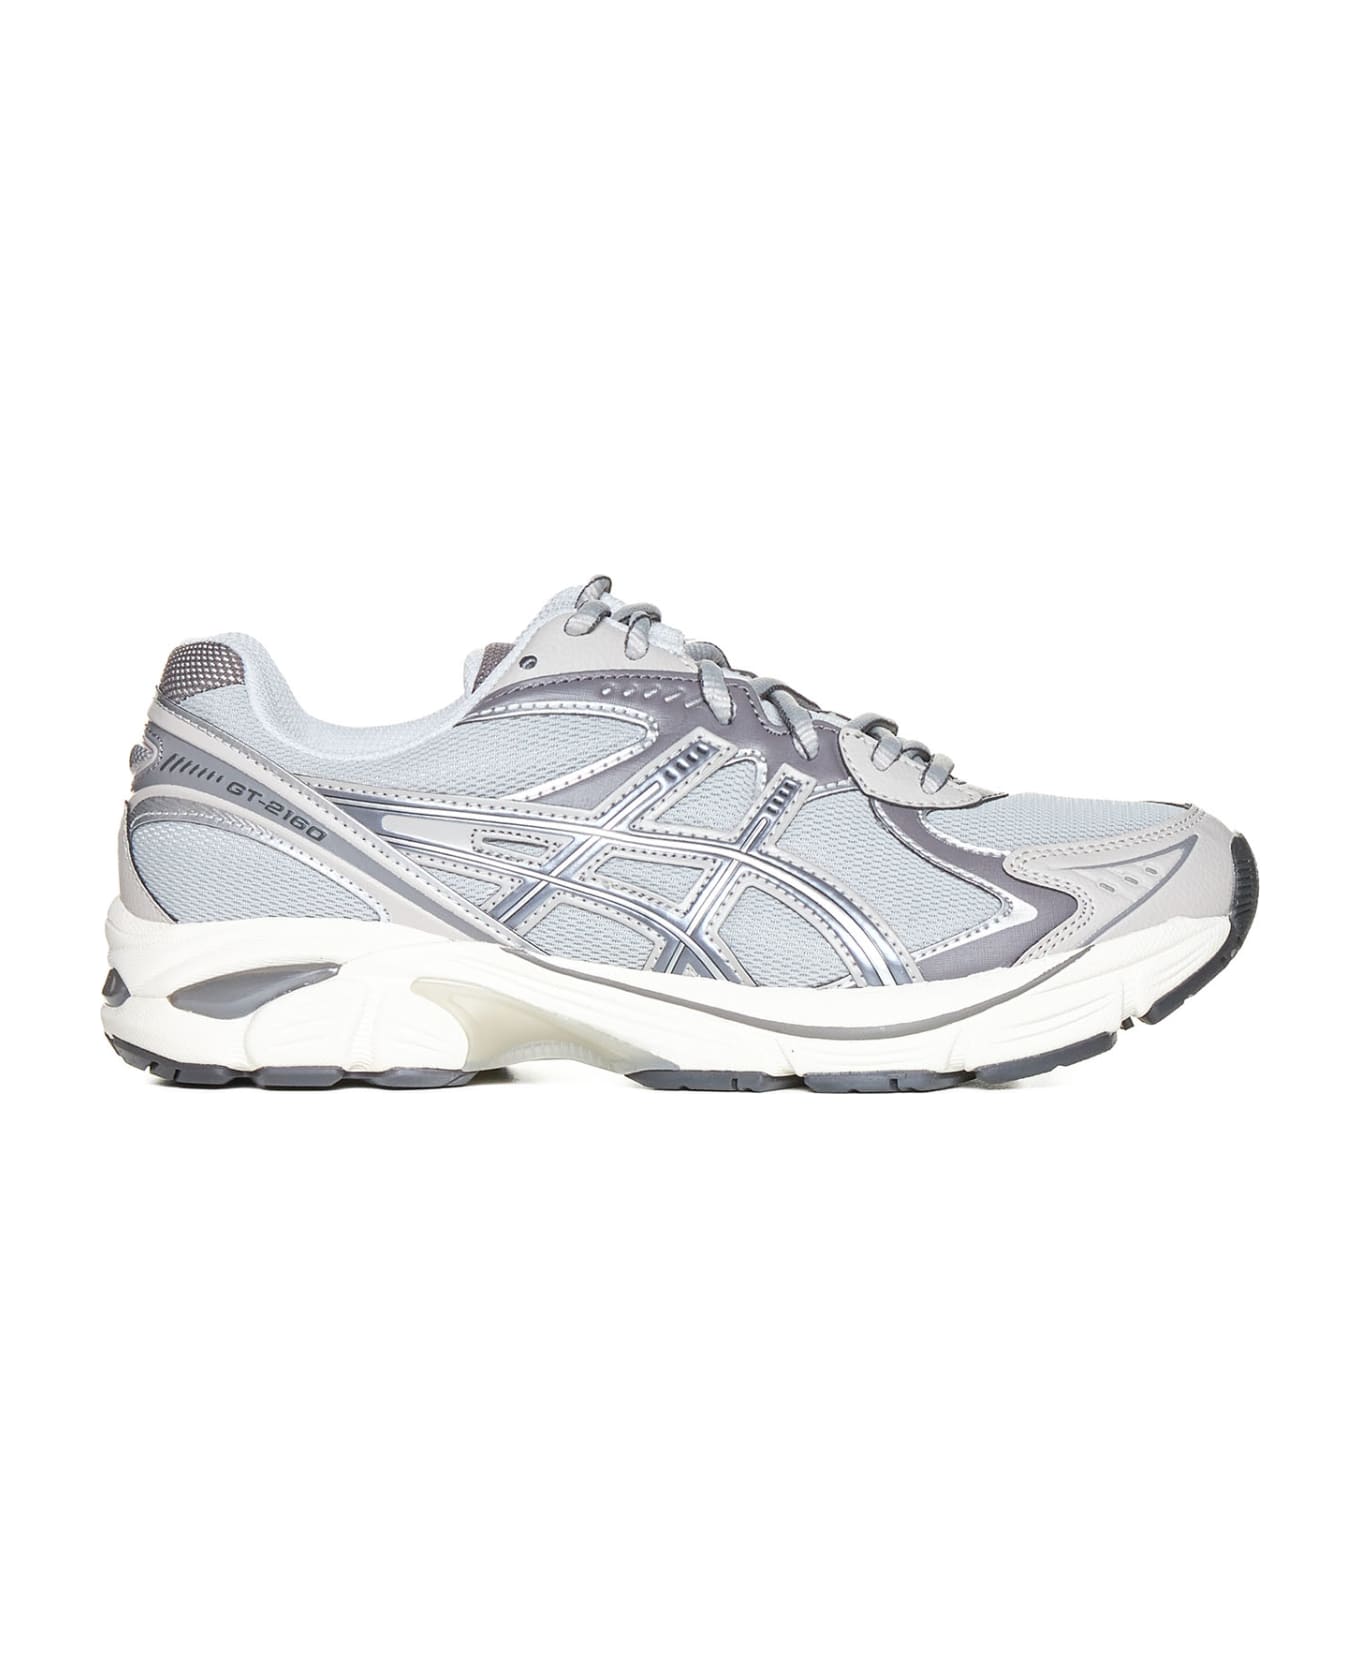 Asics Sneakers - Oyster grey/carbon